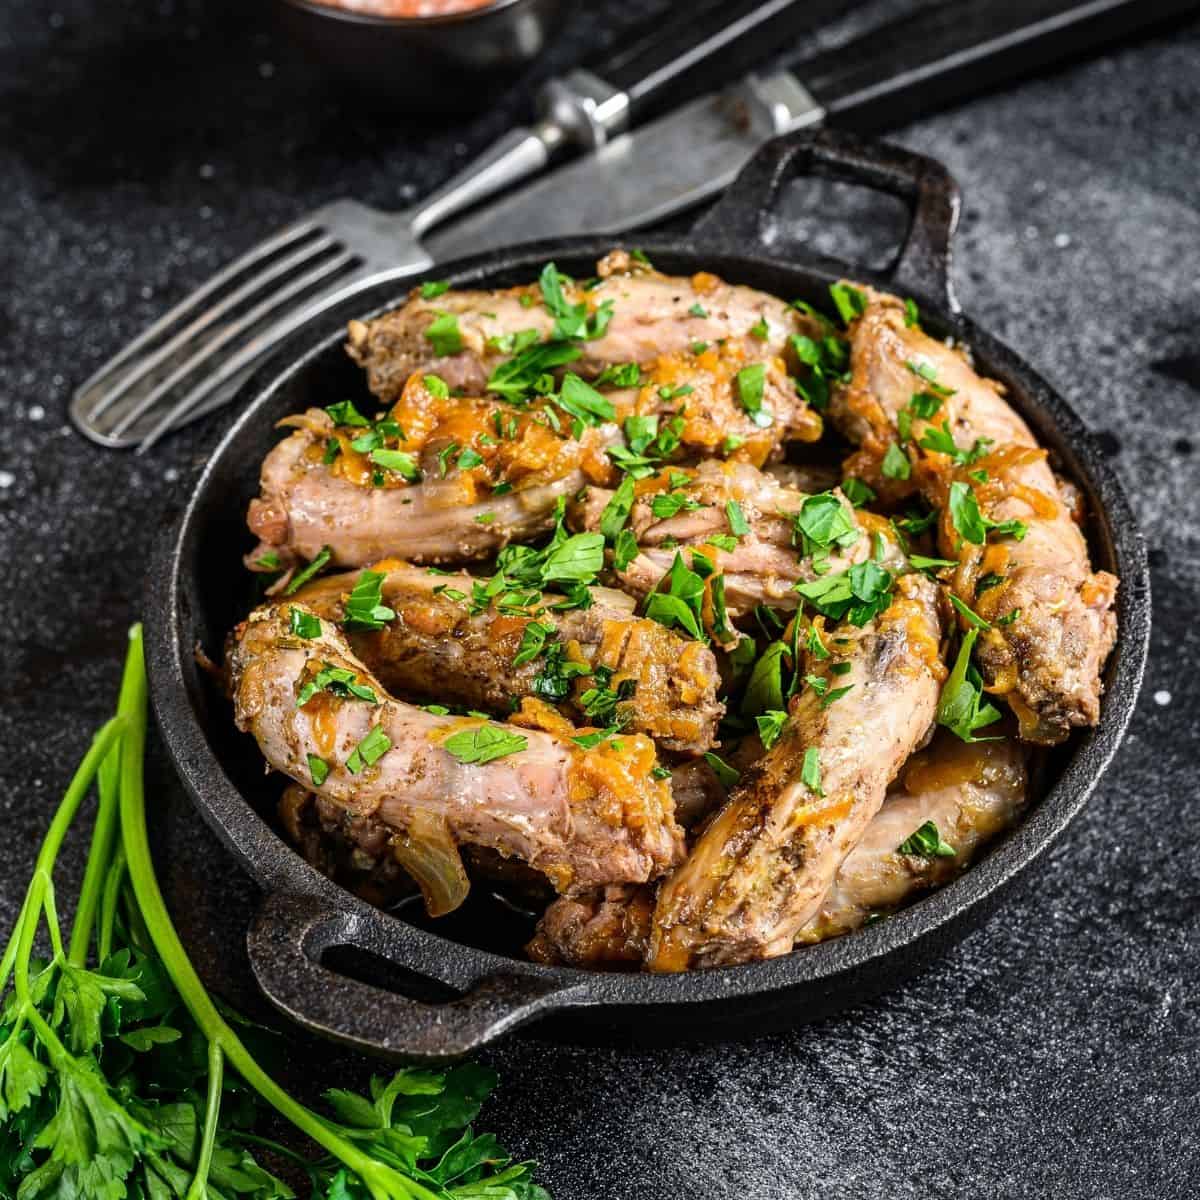 17 Mouthwatering Chicken Cast Iron Skillet Recipes | One-Pan Meals To Die For